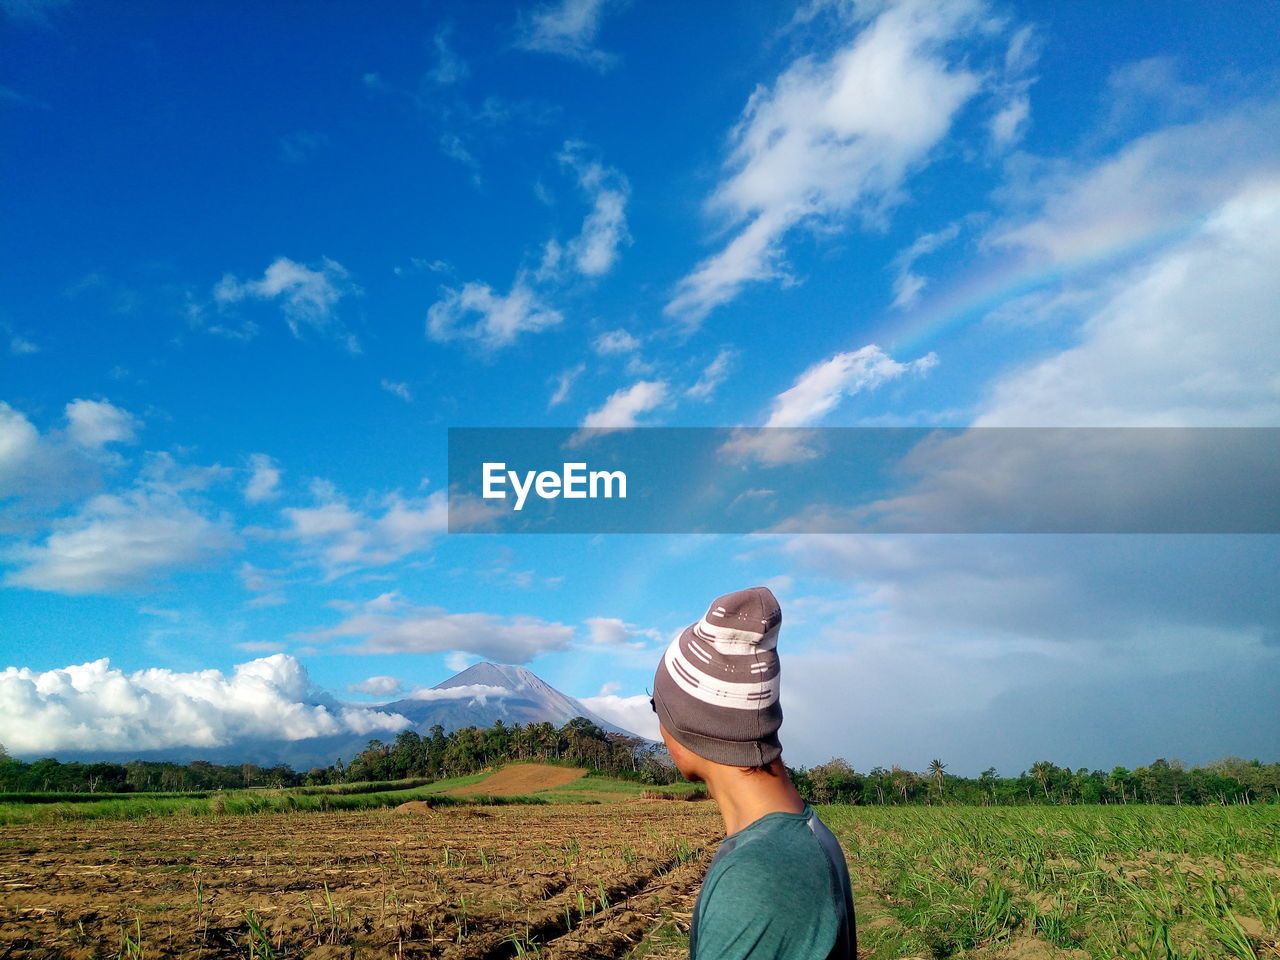 Man wearing hat while standing on agricultural field